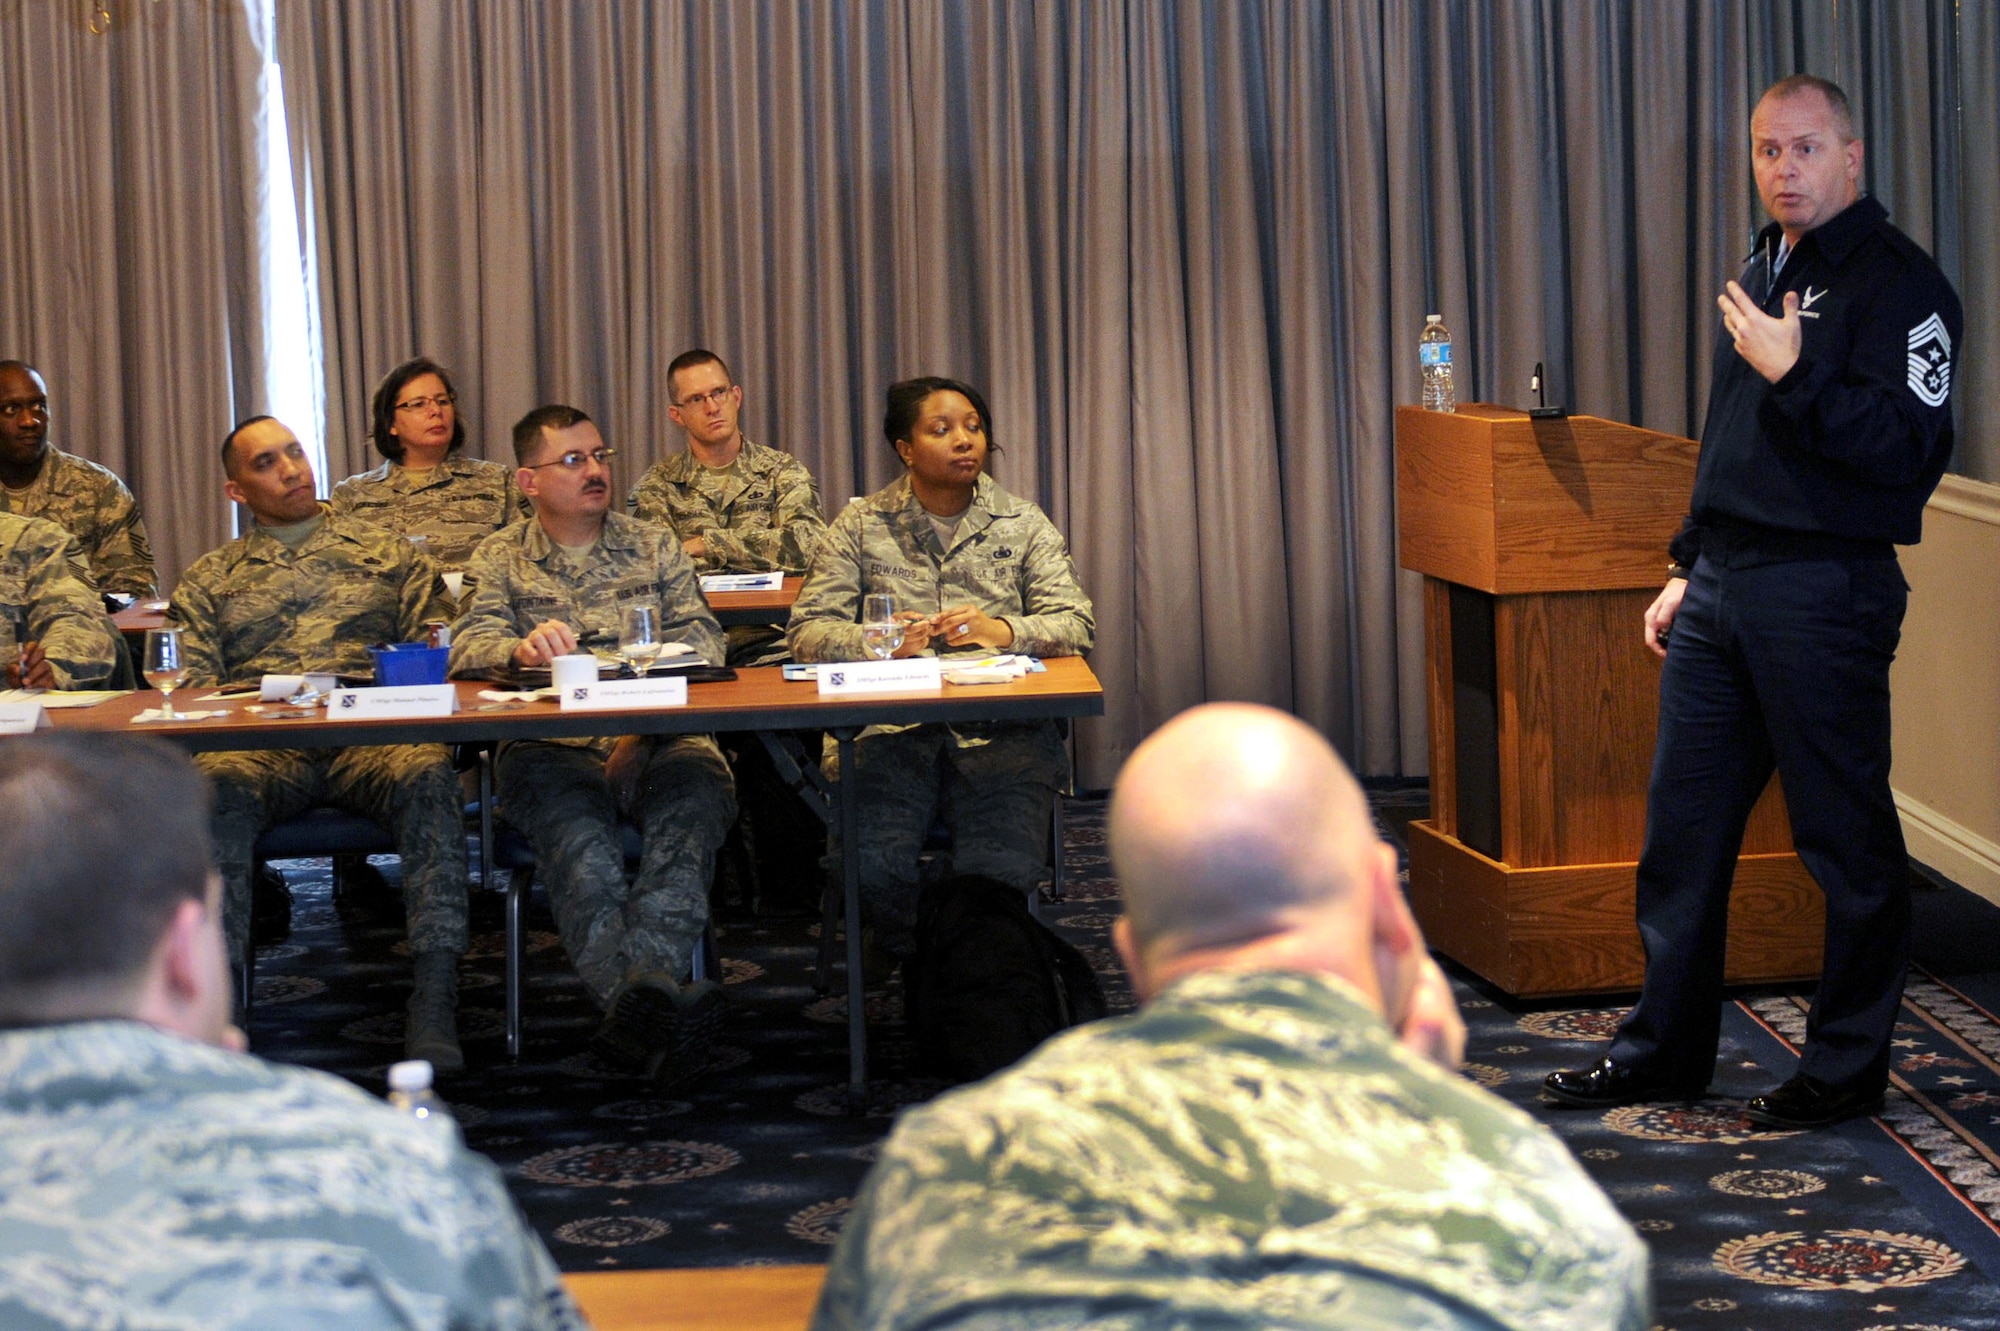 Chief Master Sgt. James Hotaling, Command Chief Master Sgt. of the Air National Guard, speaks with newly promoted Chief Master Sgts in the active duty Air Force about the role of the Air National Guard,Joint Base Bolling-Anacostia, Washington, D.C., Feb. 6, 2014. (Air National Guard photo by Tech. Sgt. David Eichaker)
